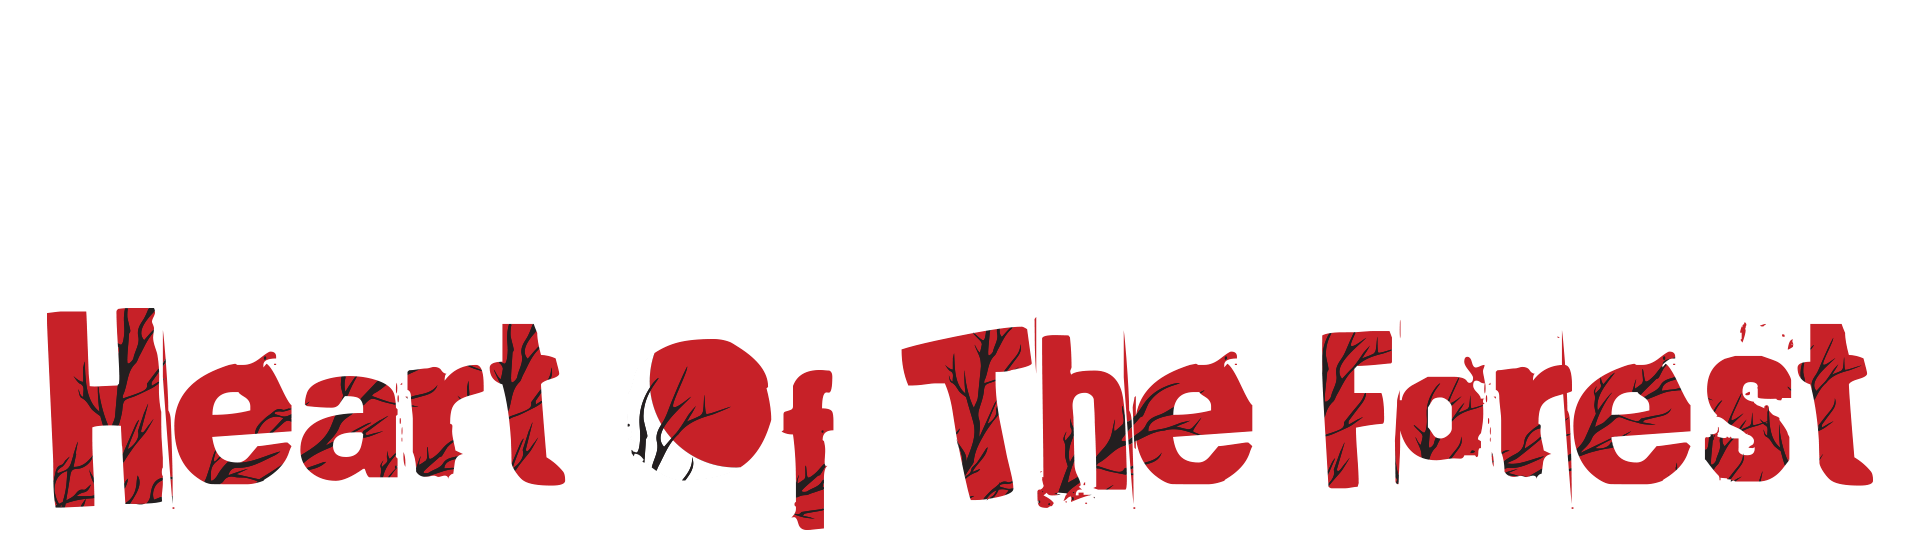 Werewolf: The Apocalypse - Heart Of The Forest Is Now Available